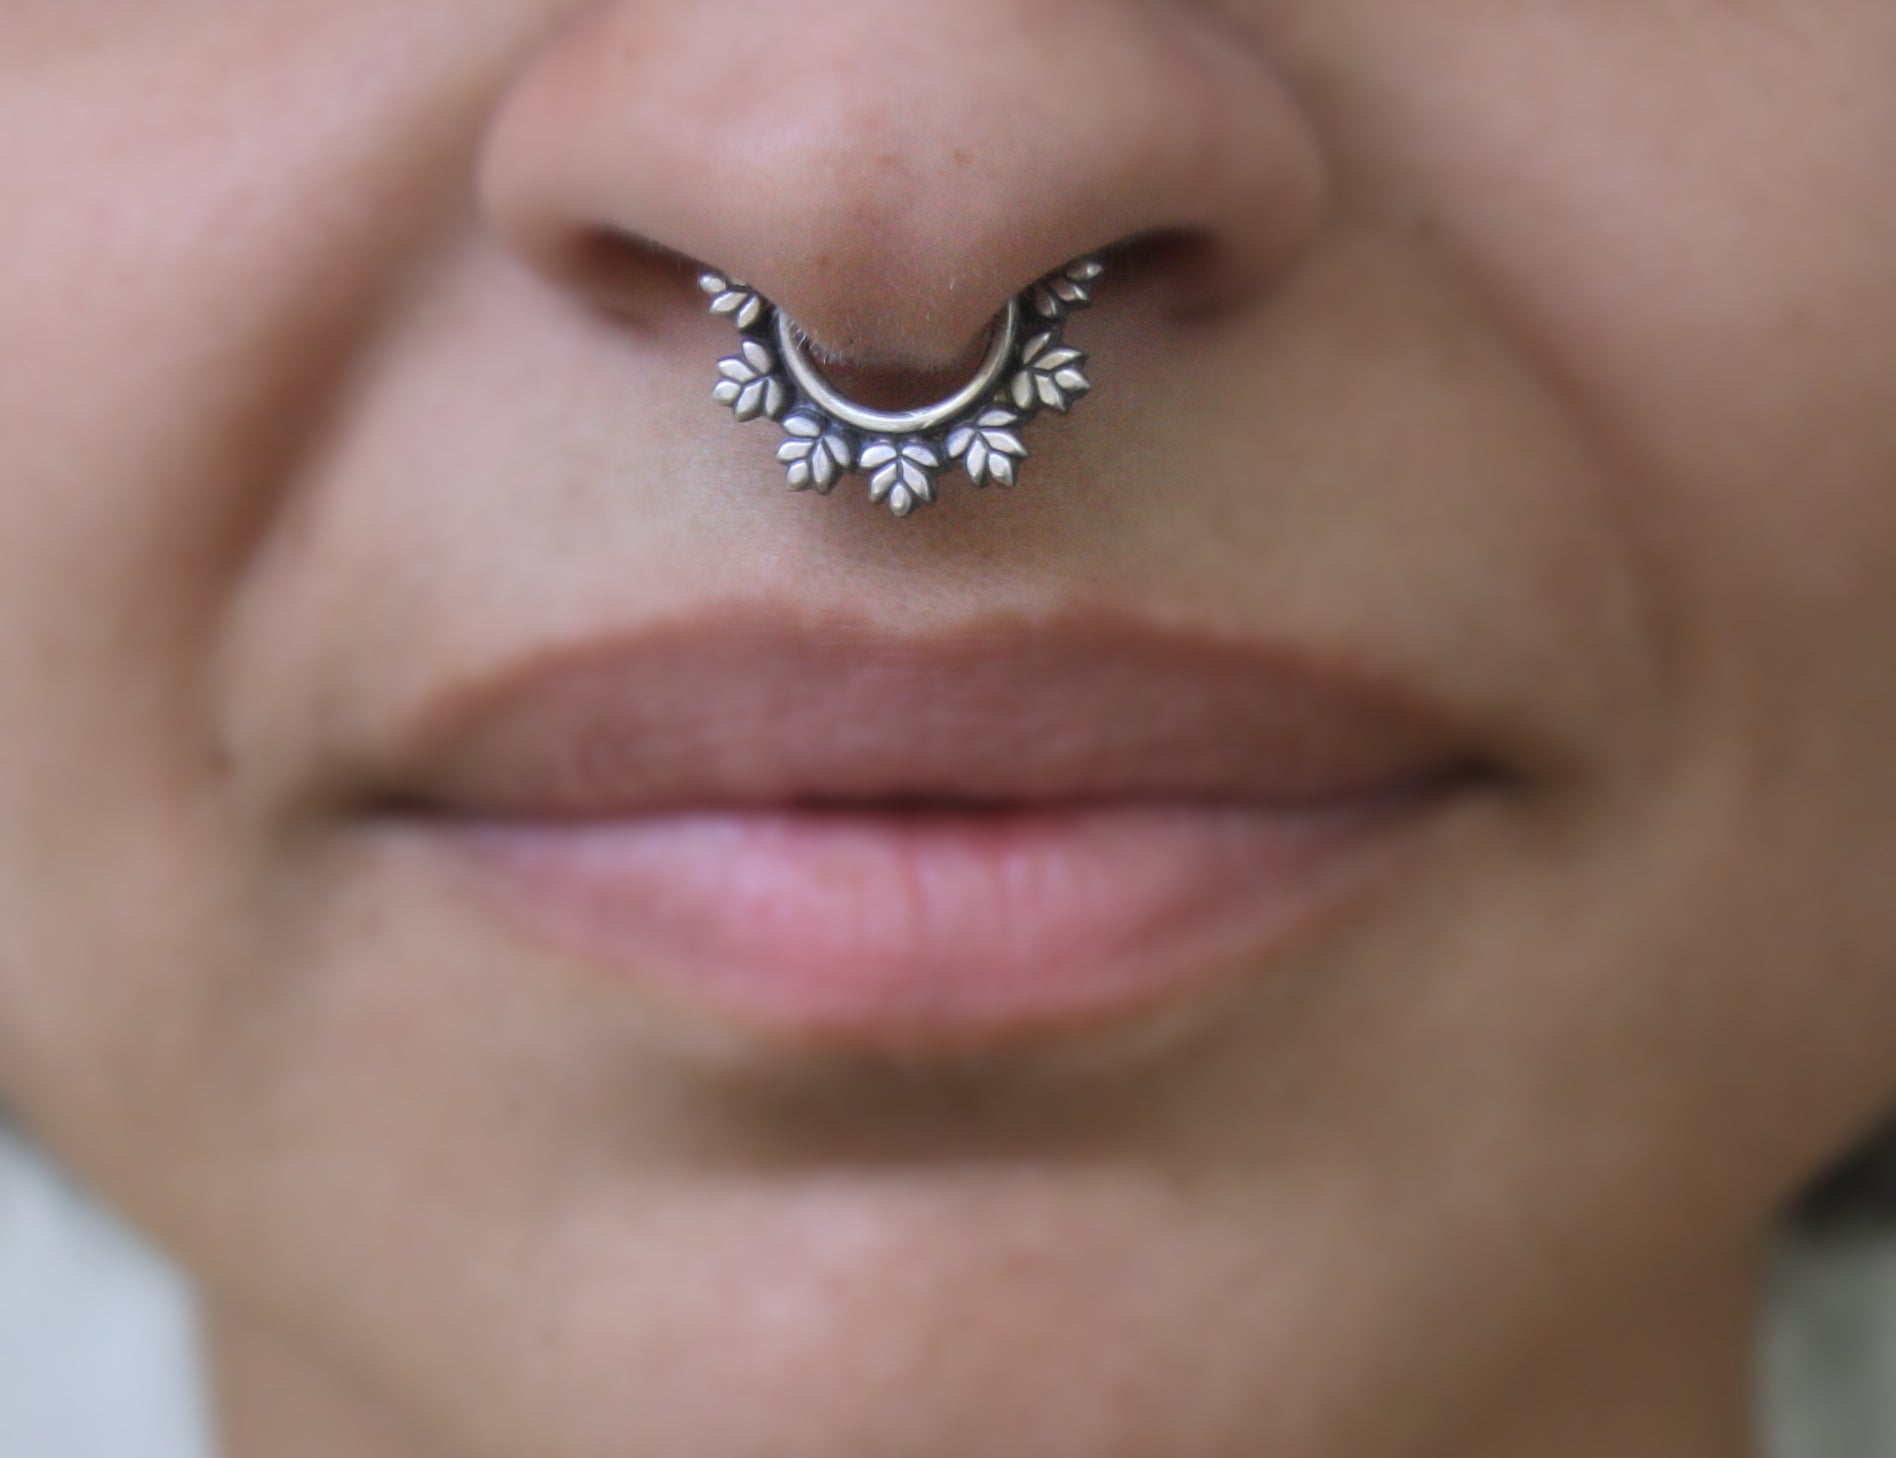 Buy silver Septum ring Online in India - Septum ring clipon  and for piercing - Quirksmith